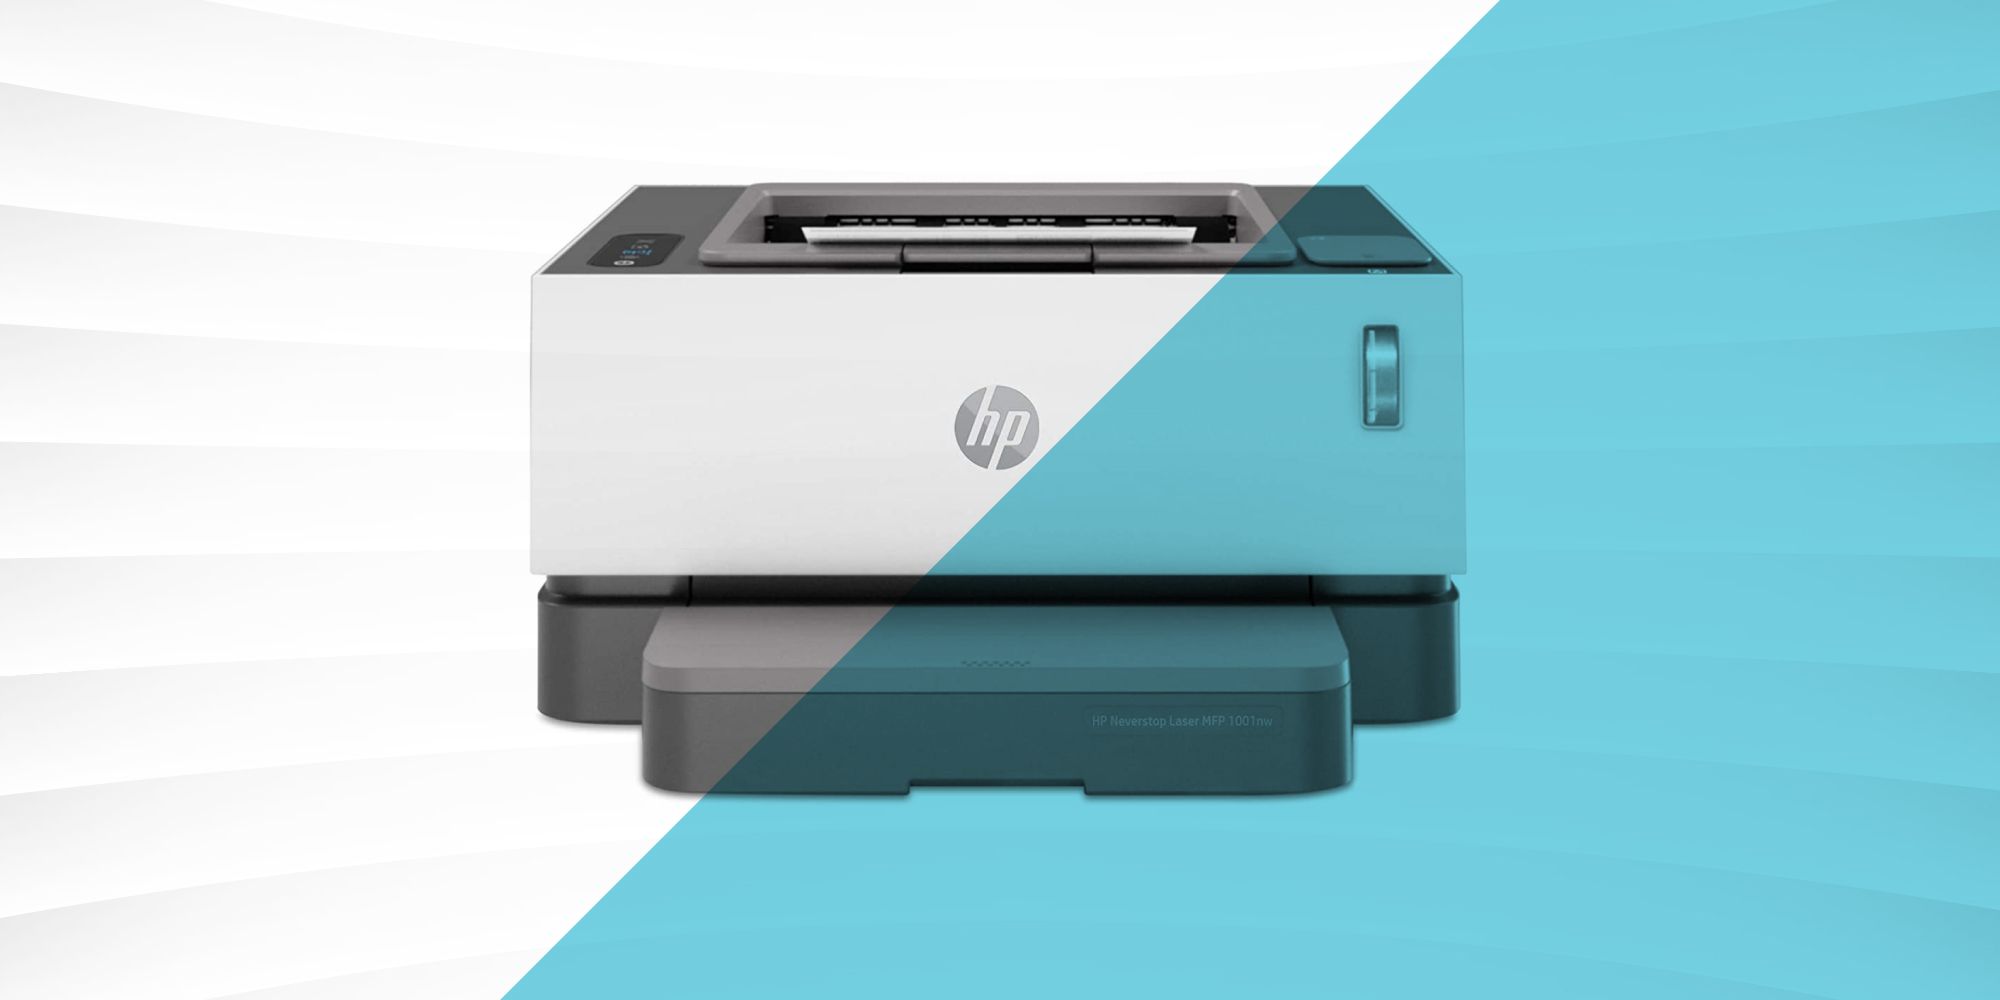 11 Best HP Printers in 2022 - HP Printer Recommendations